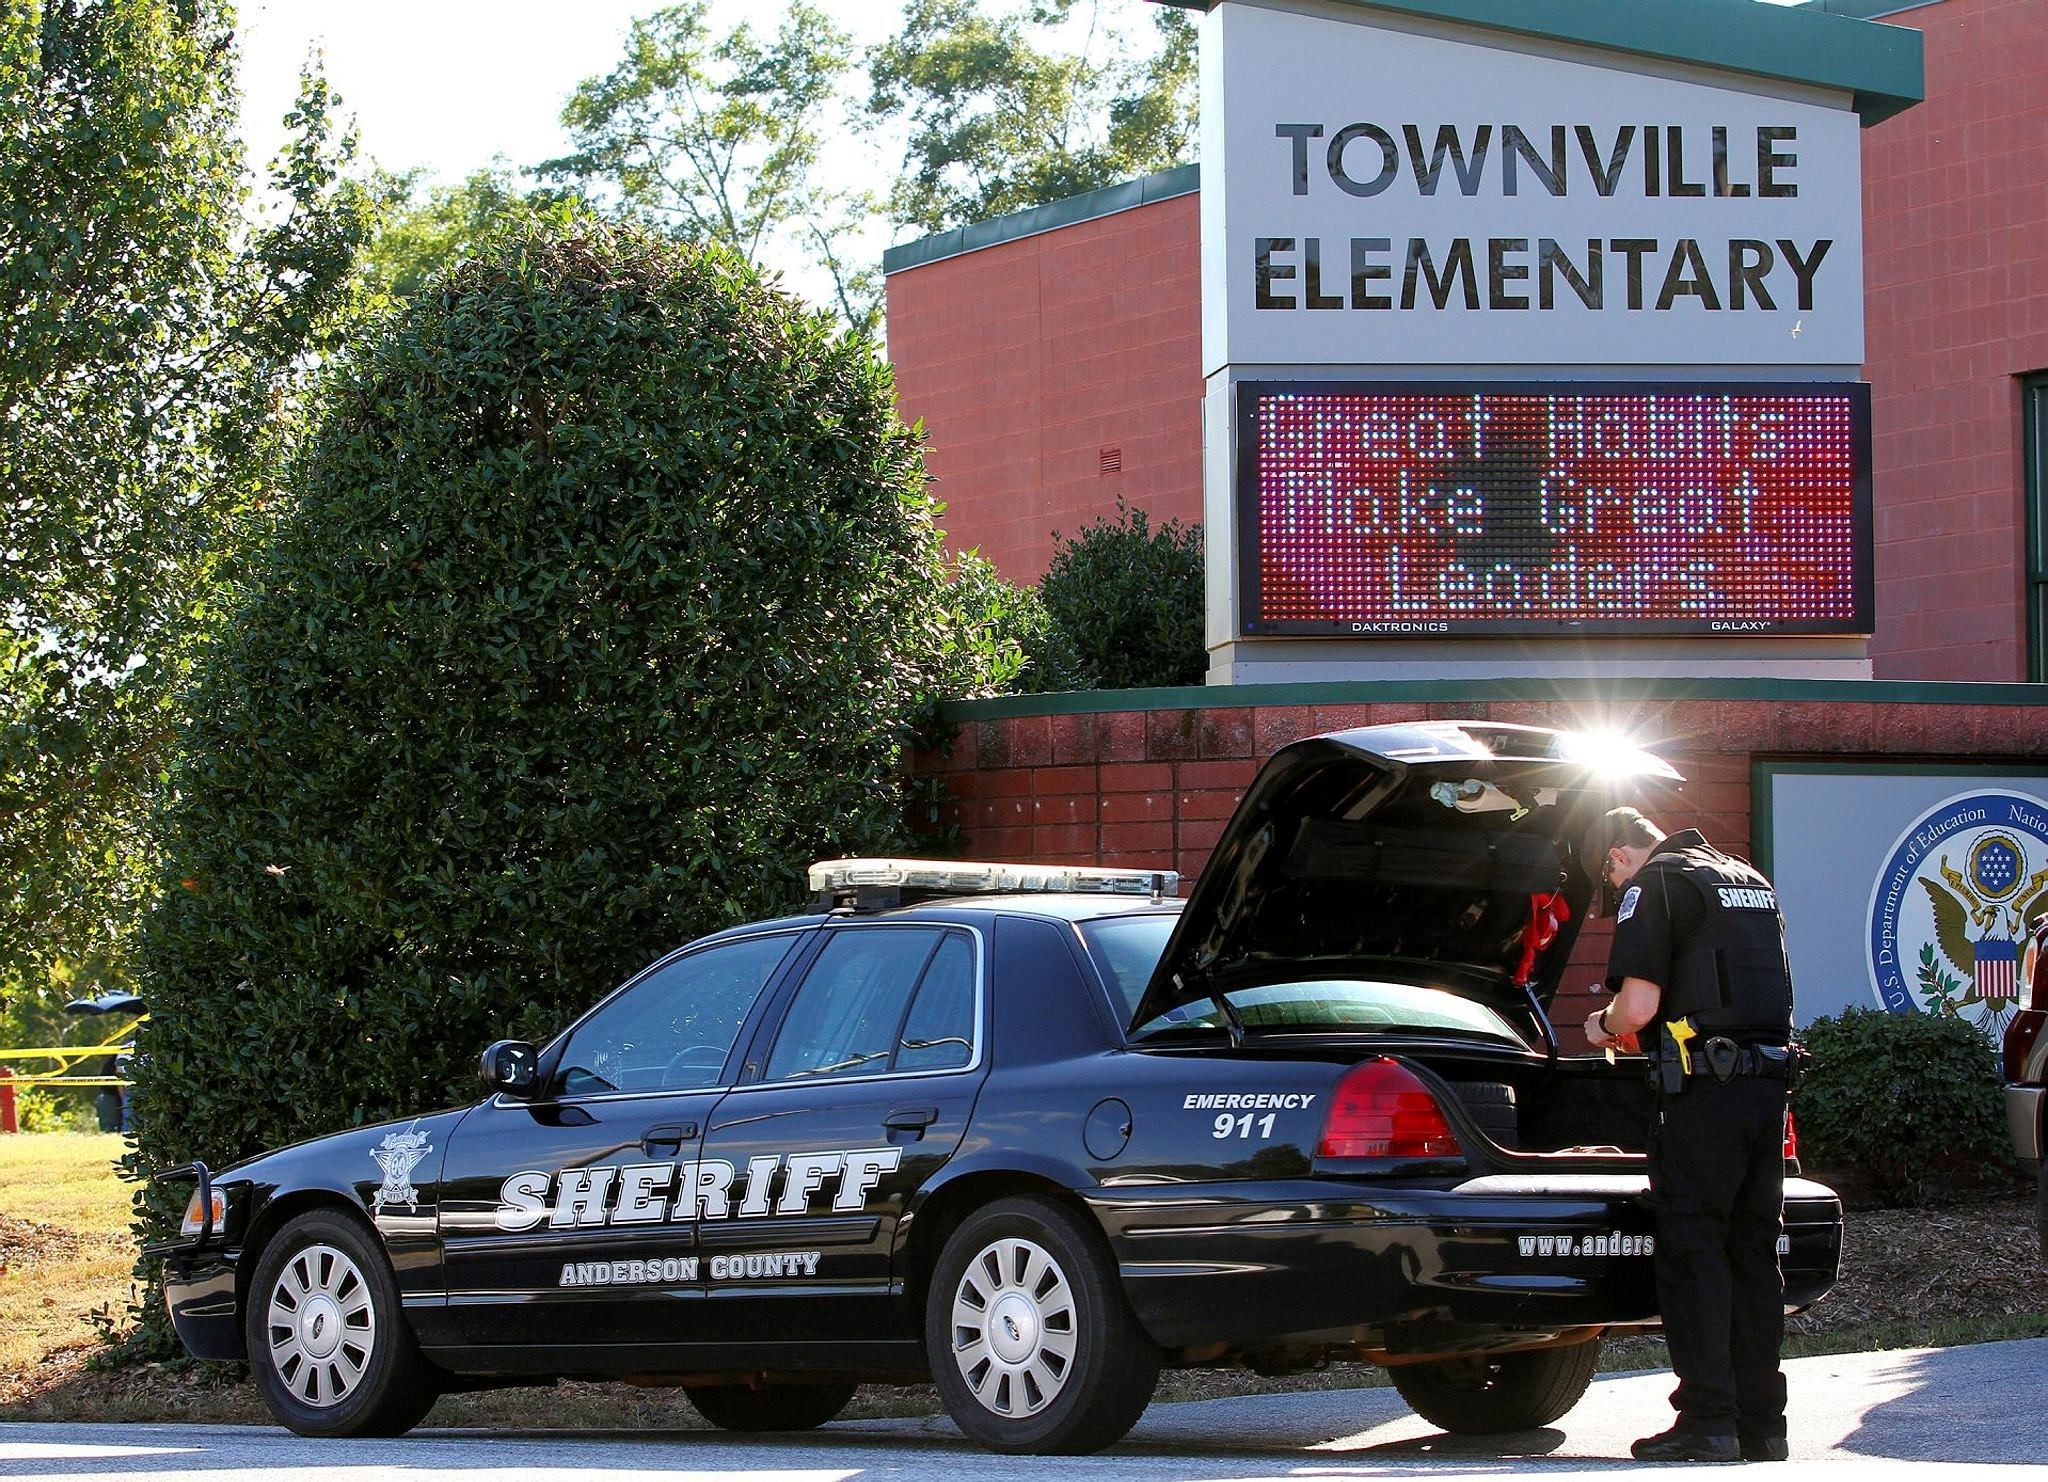 An Anderson County sheriffu2019s deputy stands outside of Townville Elementary School after a shooting in Townville, South Carolina, Sept. 28.